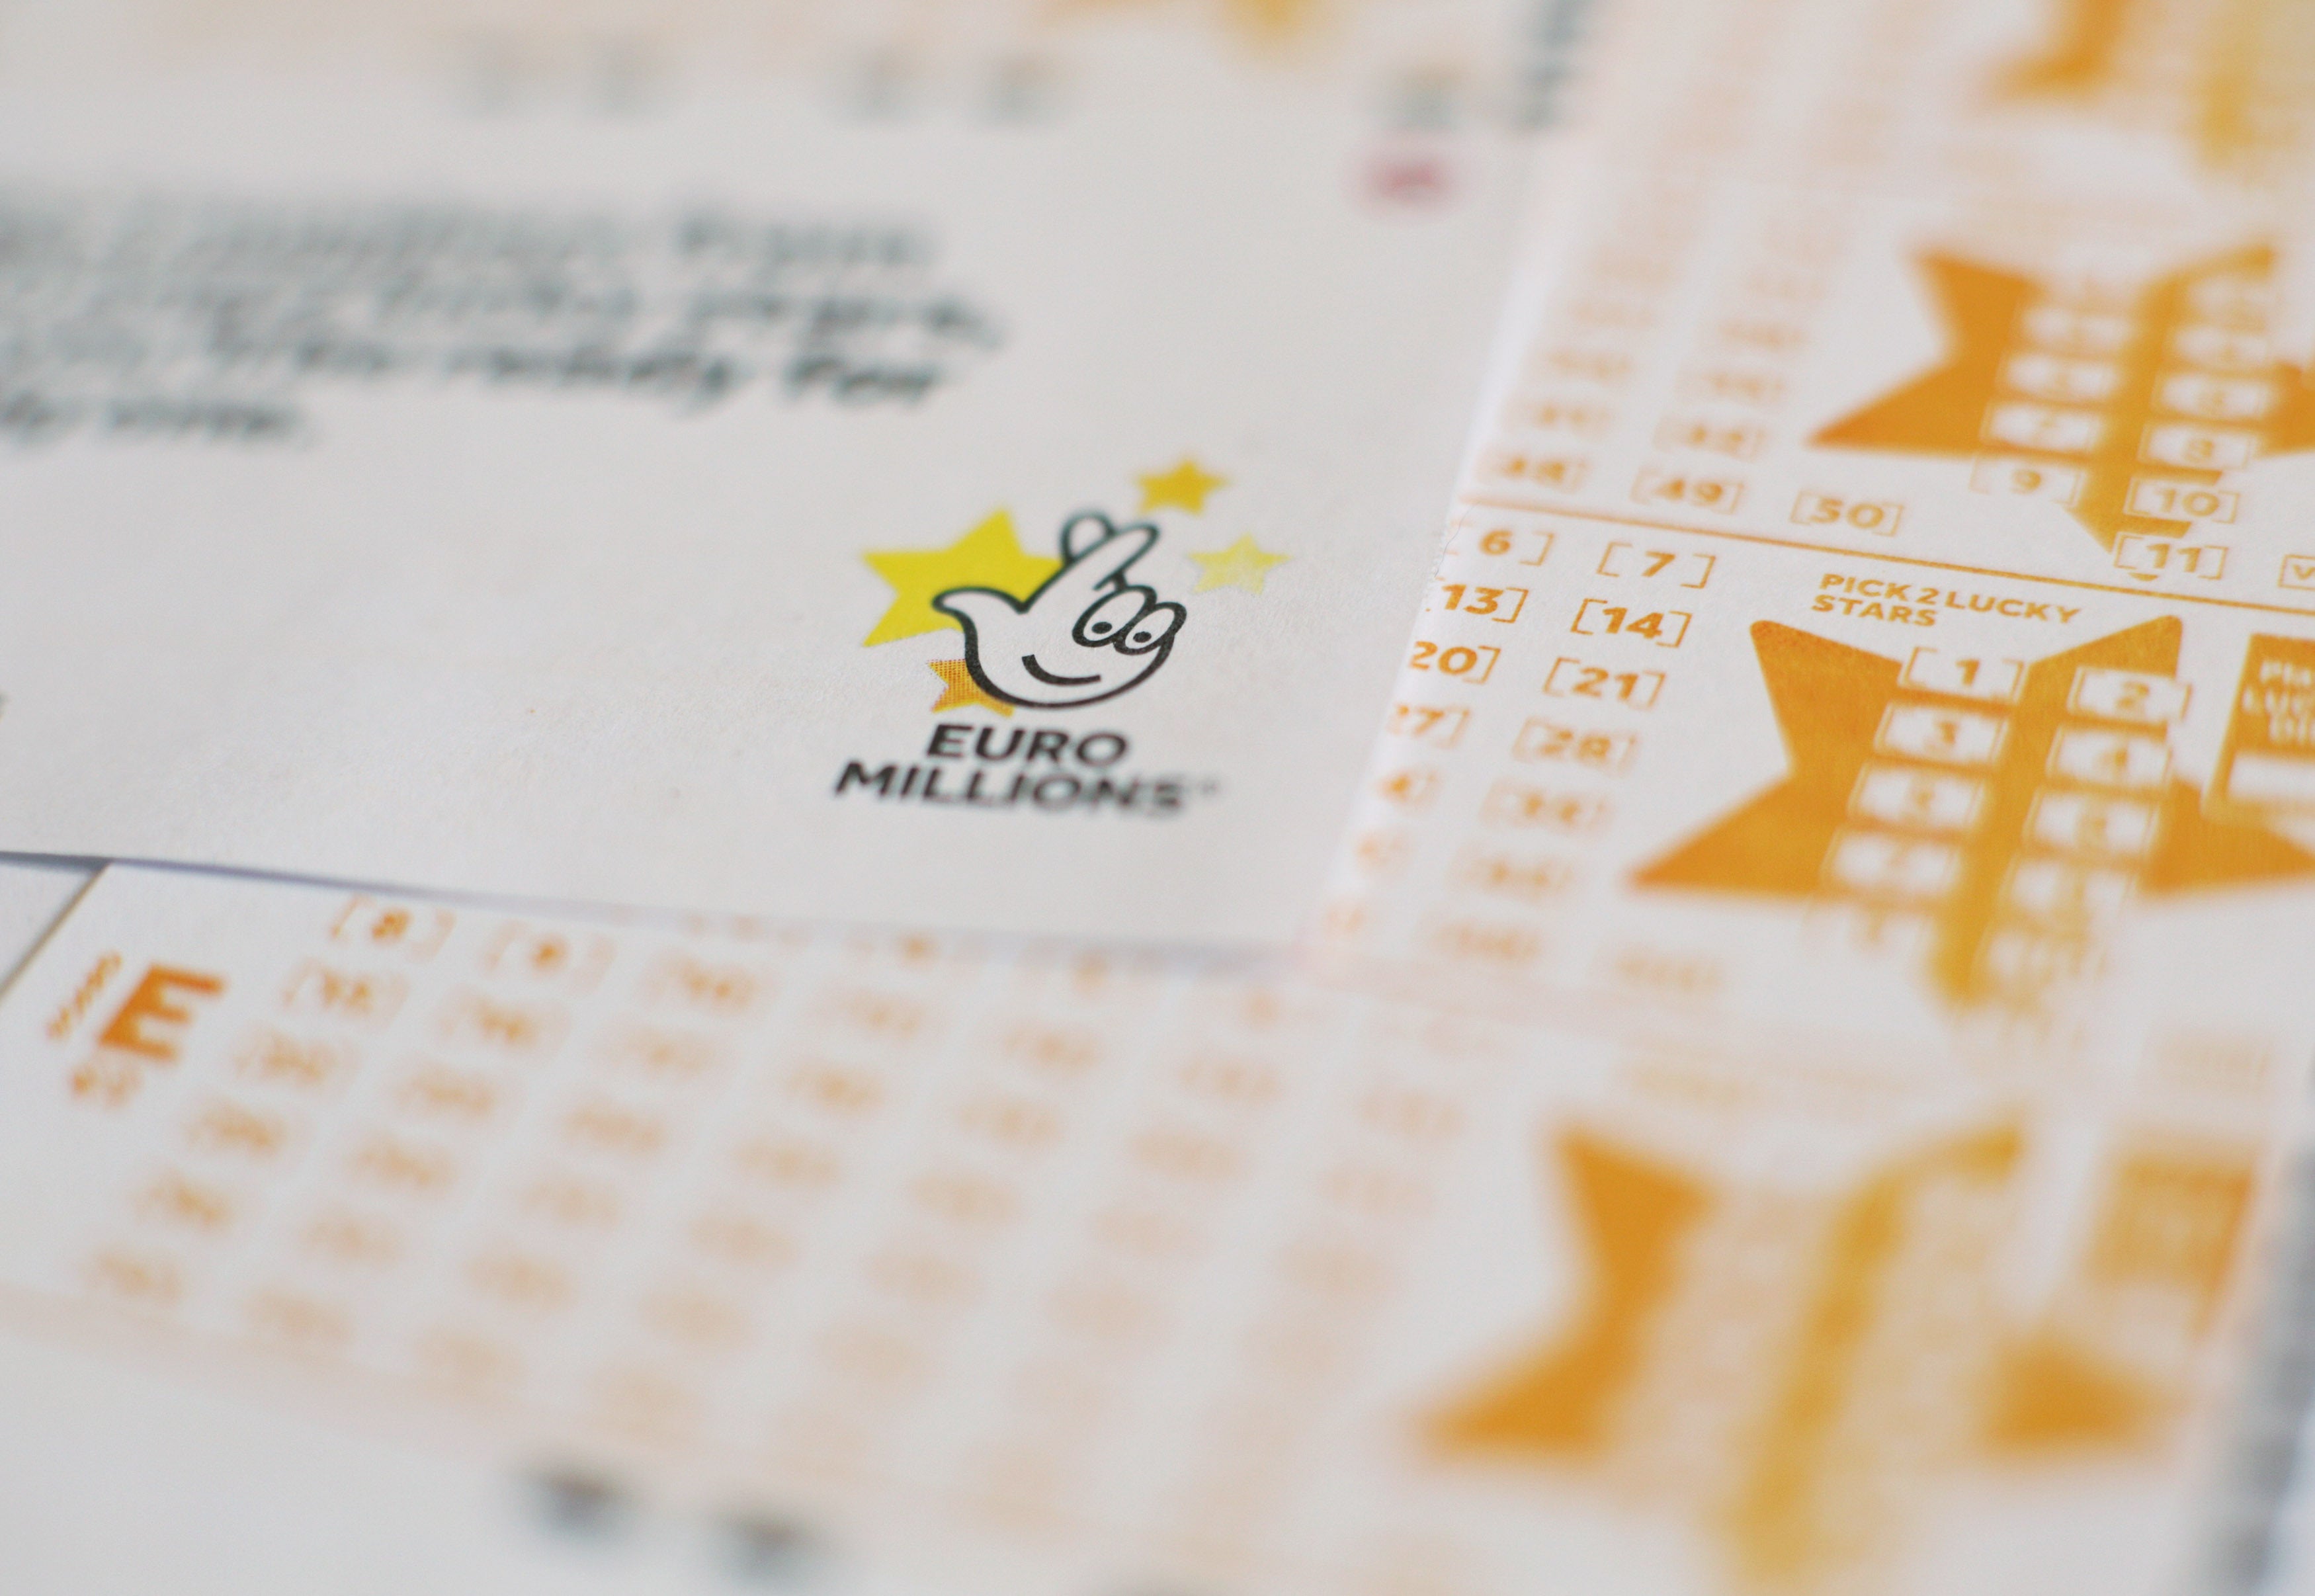 Tuesday’s EuroMillions jackpot will be an estimated £184 million (PA)